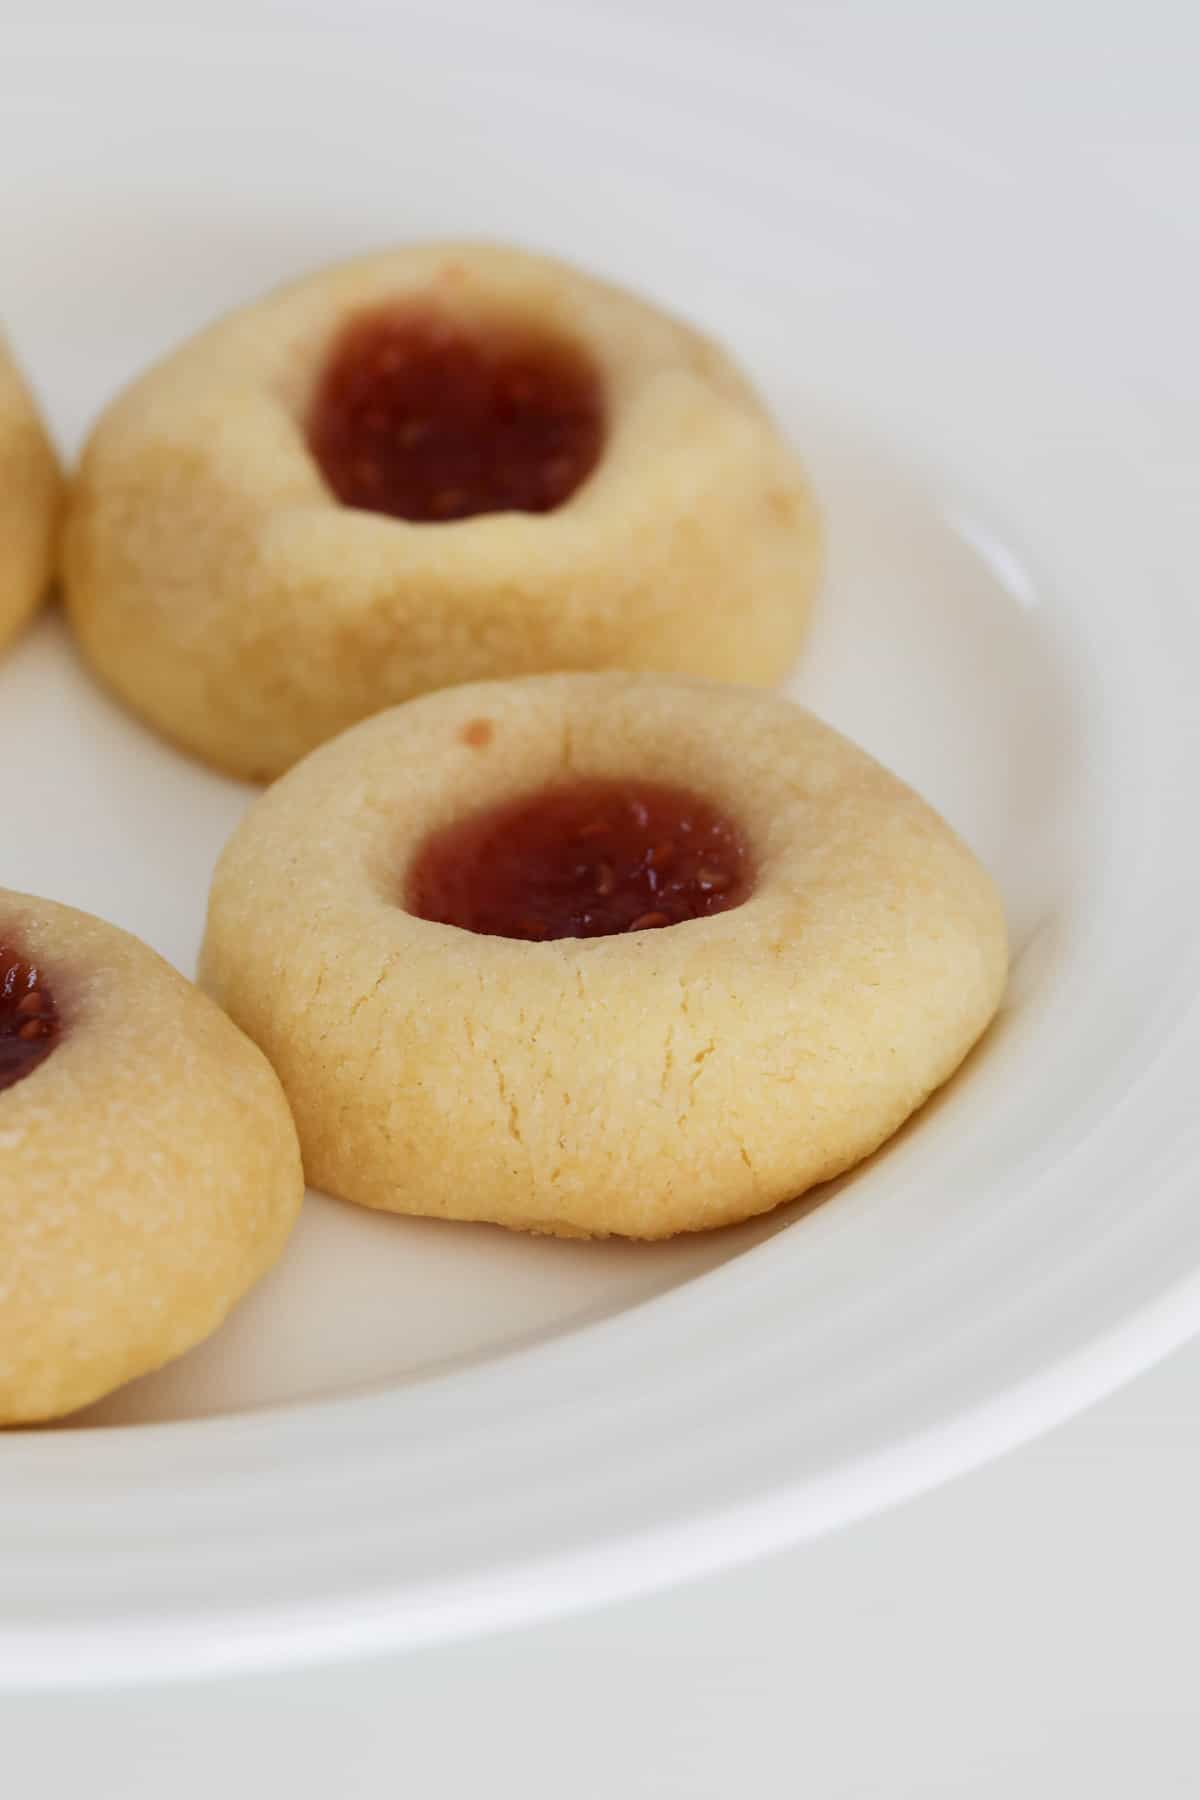 A plate of biscuits with jam in the middle.